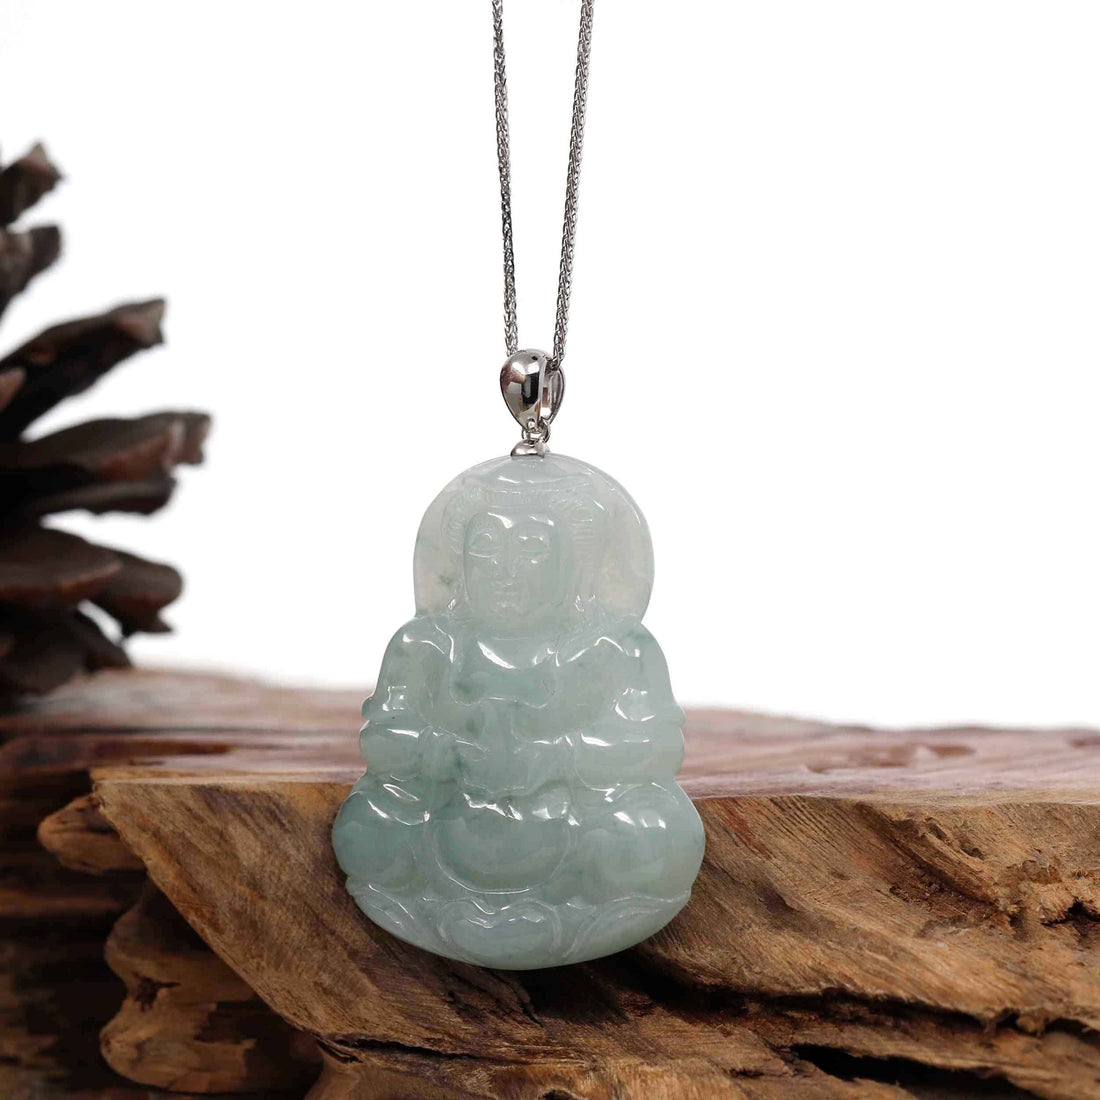 Baikalla Jewelry Jade Guanyin Pendant Necklace Copy of "Goddess of Compassion" Genuine Burmese Ice Blue Jadeite Jade Guanyin Necklace With Good Luck Design Sterling Silver Bail